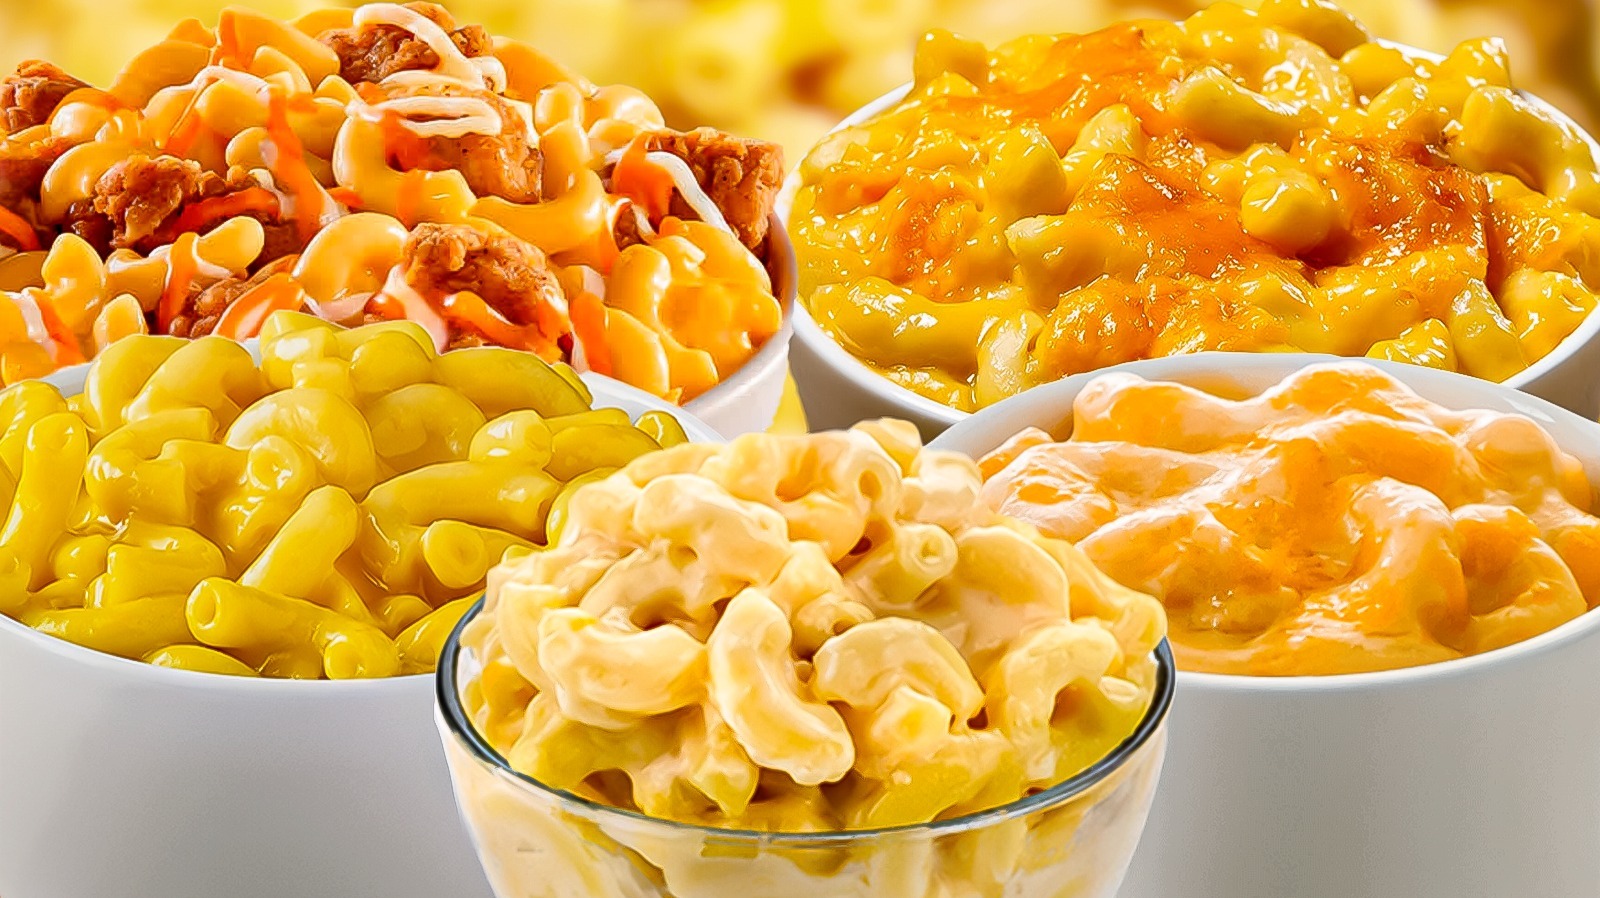 Every Annie's Mac And Cheese Flavor, Ranked Worst To Best